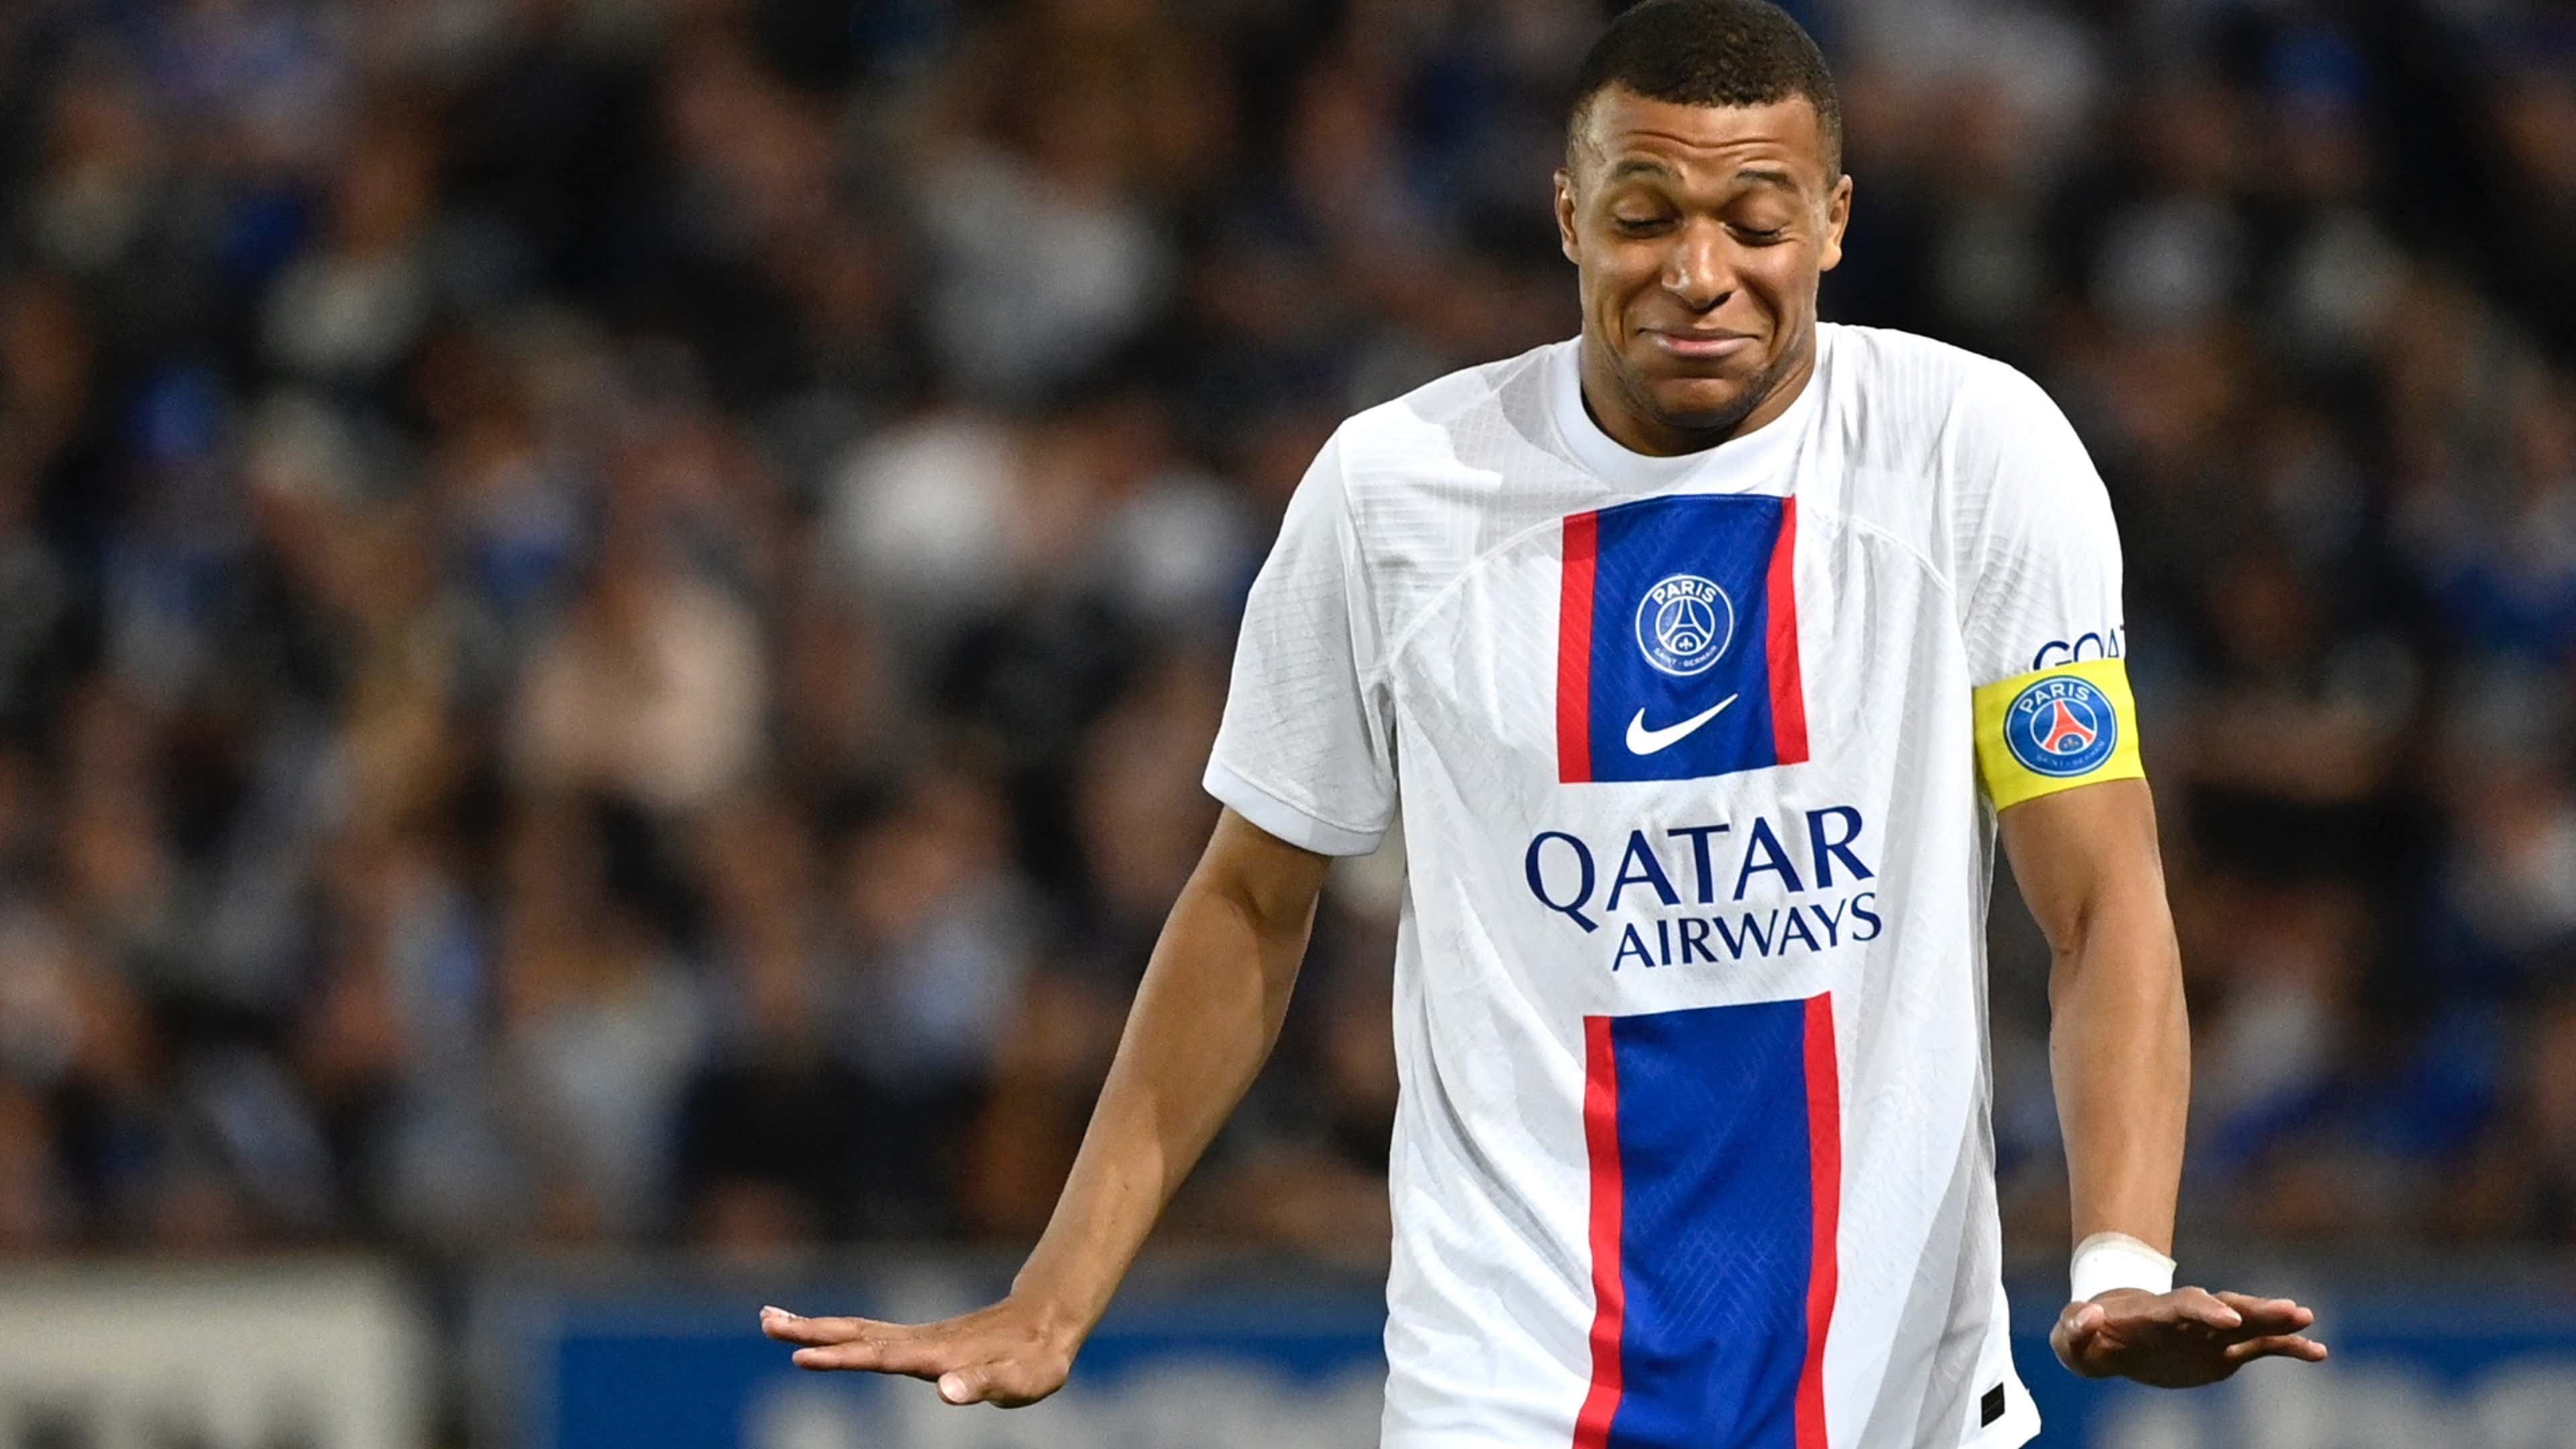 Injured Mbappé doubtful for Champions League in major blow to PSG